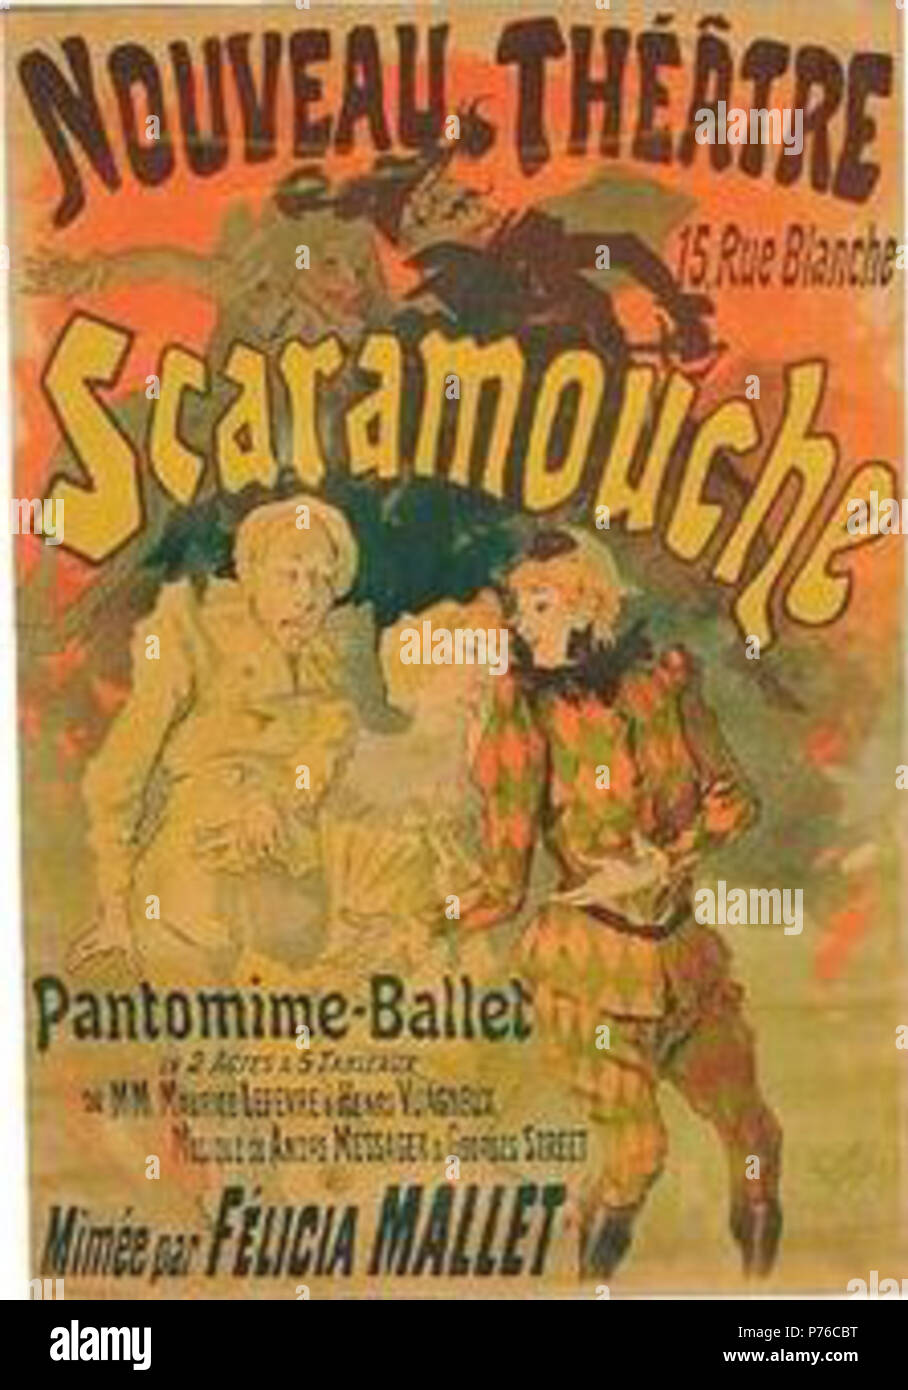 English: 1891 poster for the ballet/pantomime Scaramouche, written by Maurice Lefèvre and Henri Vuagneux, with music by André Messager (1853-1929), starring Félicia Mallet . 4 February 2014, 12:38:32 210 Scaramouche 1891 poster Stock Photo